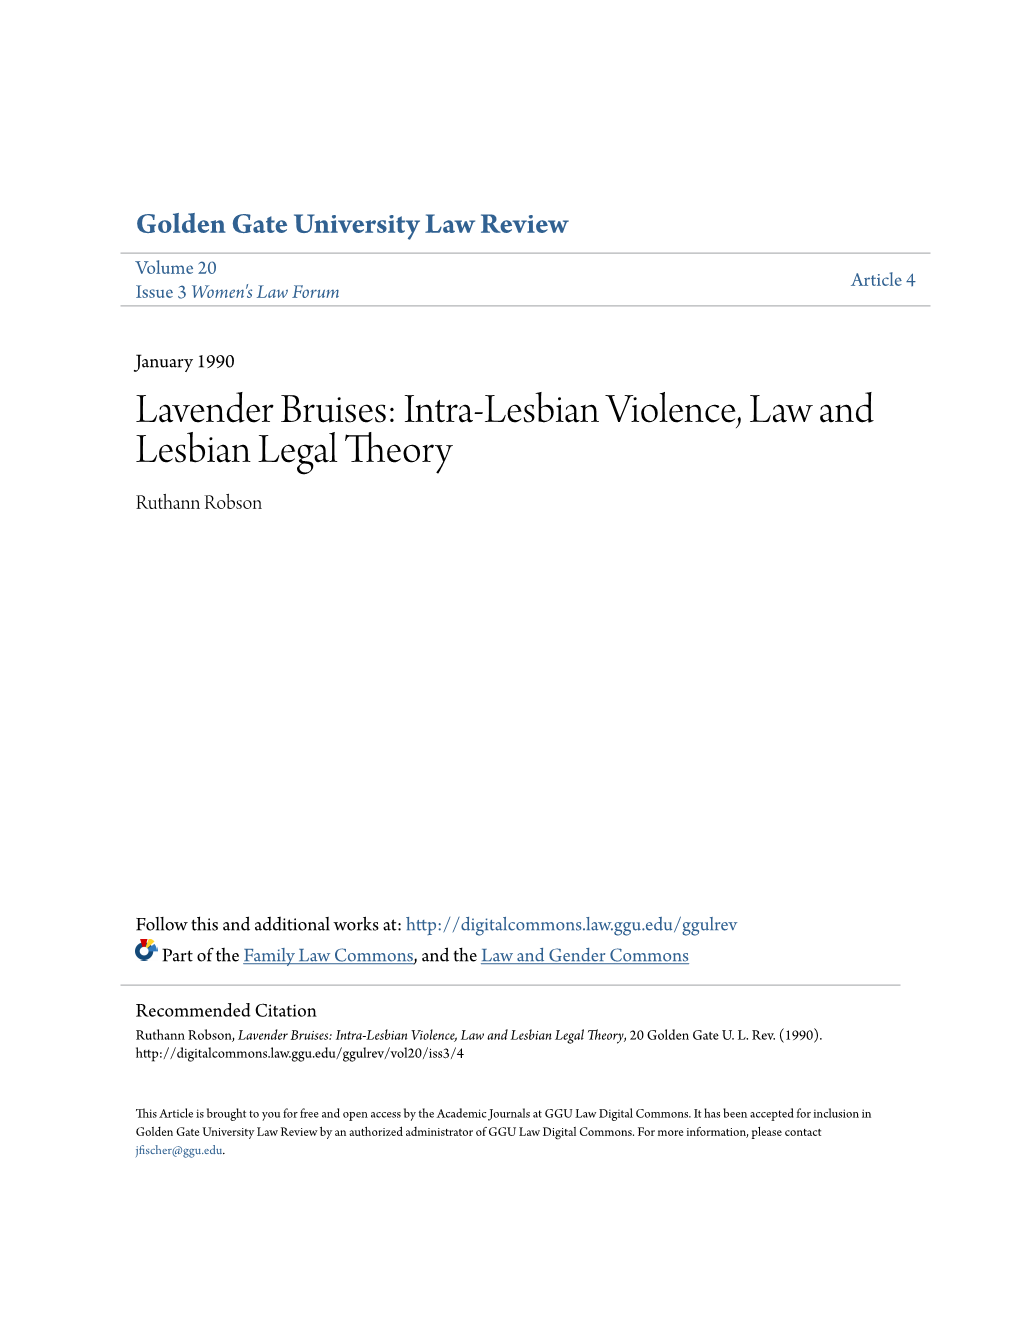 Intra-Lesbian Violence, Law and Lesbian Legal Theory Ruthann Robson